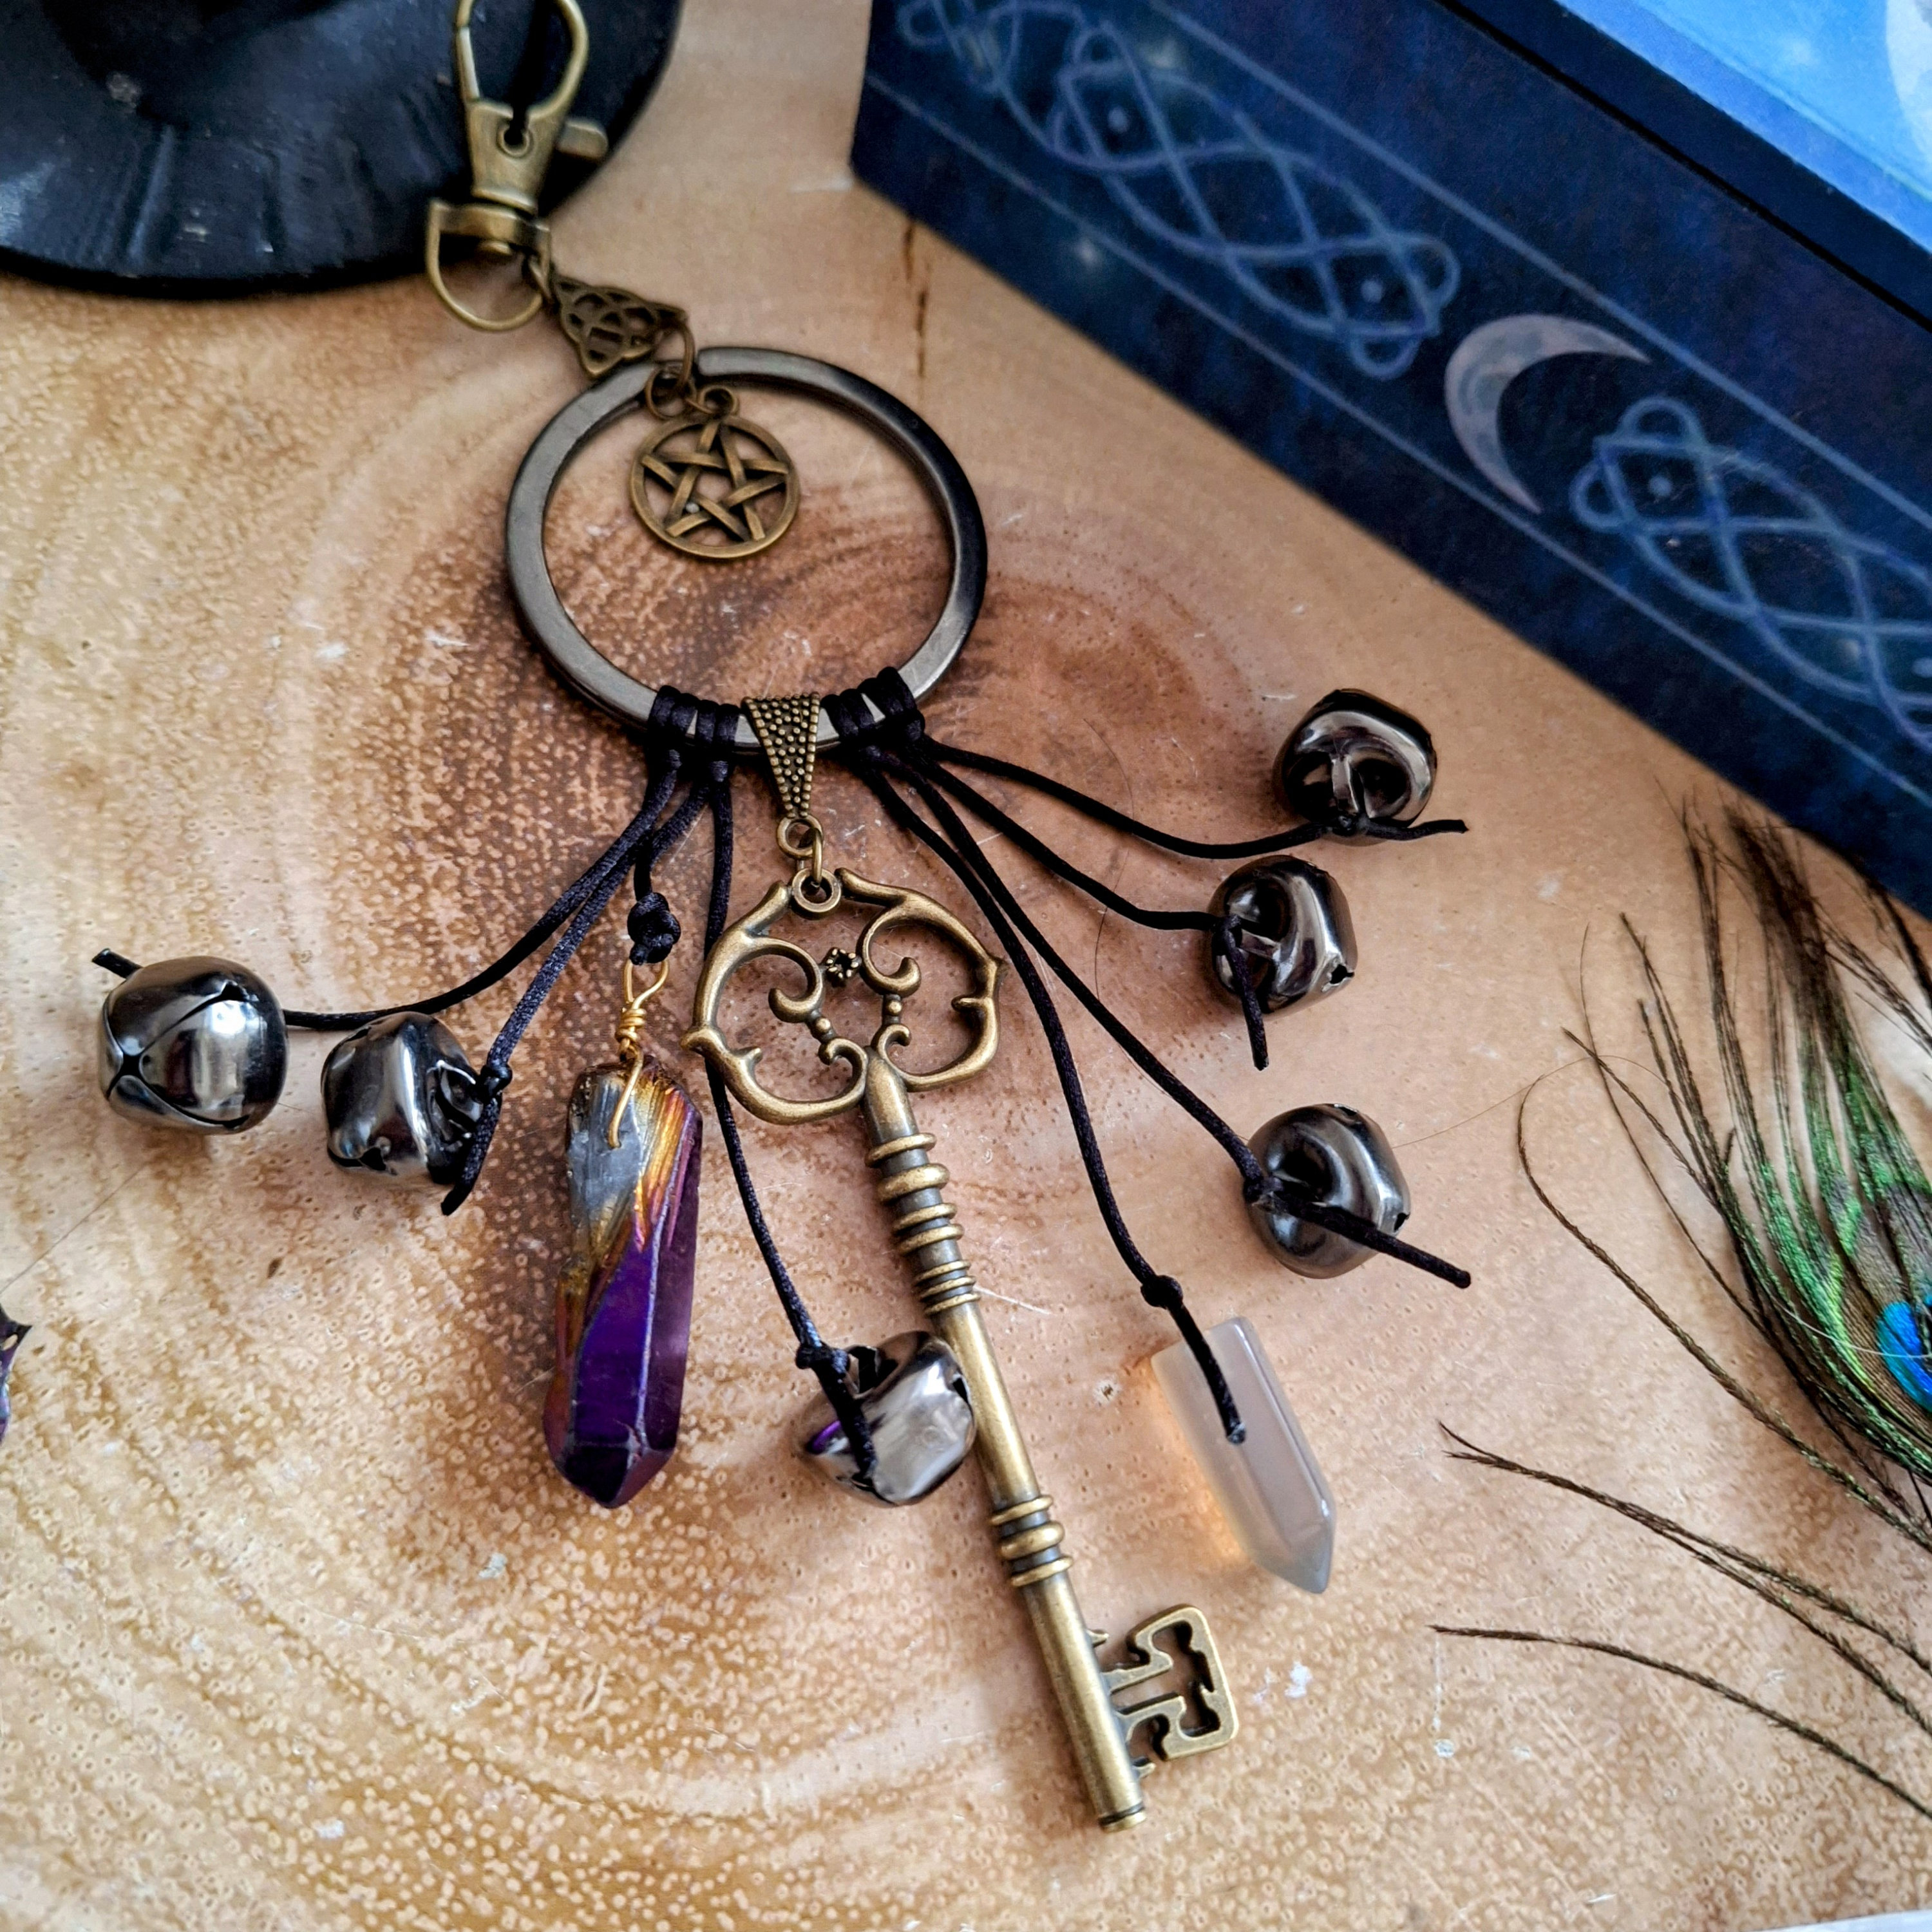 Handmade Witchbells, Witches Bells, Door Protection, Witch Bells, Witchy  Decor, Wind Chime 